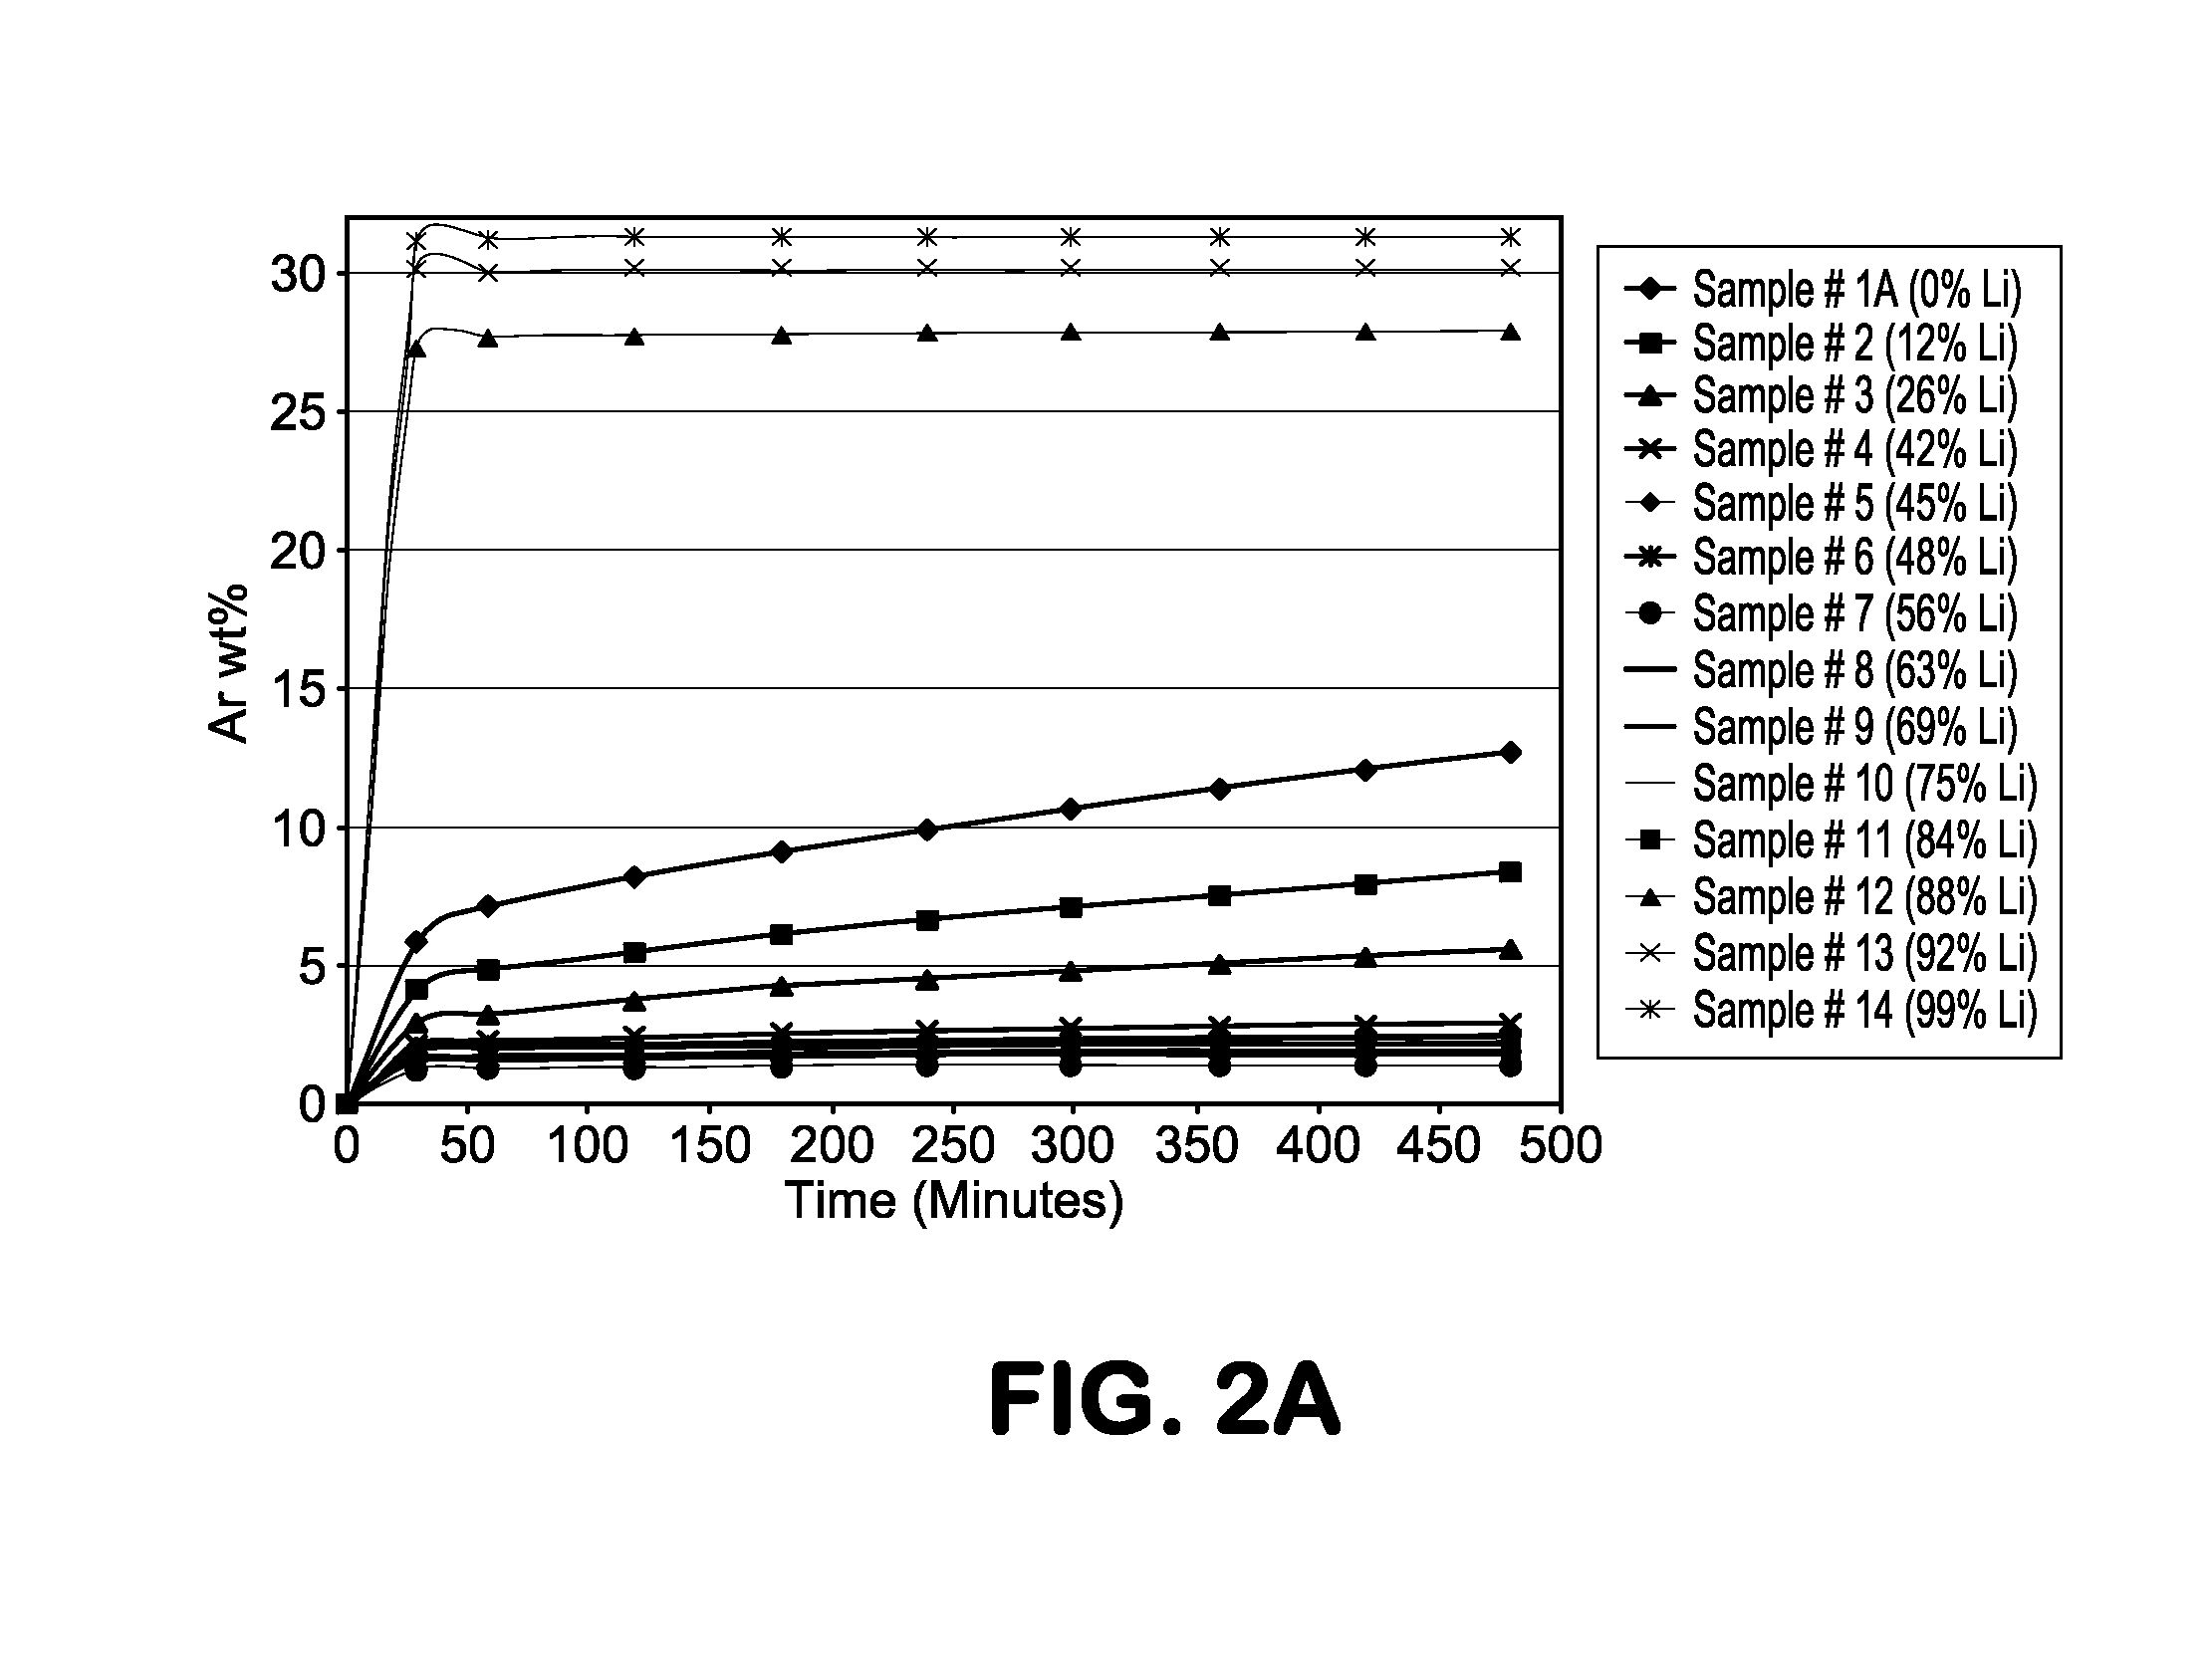 Adsorbent composition for argon purification